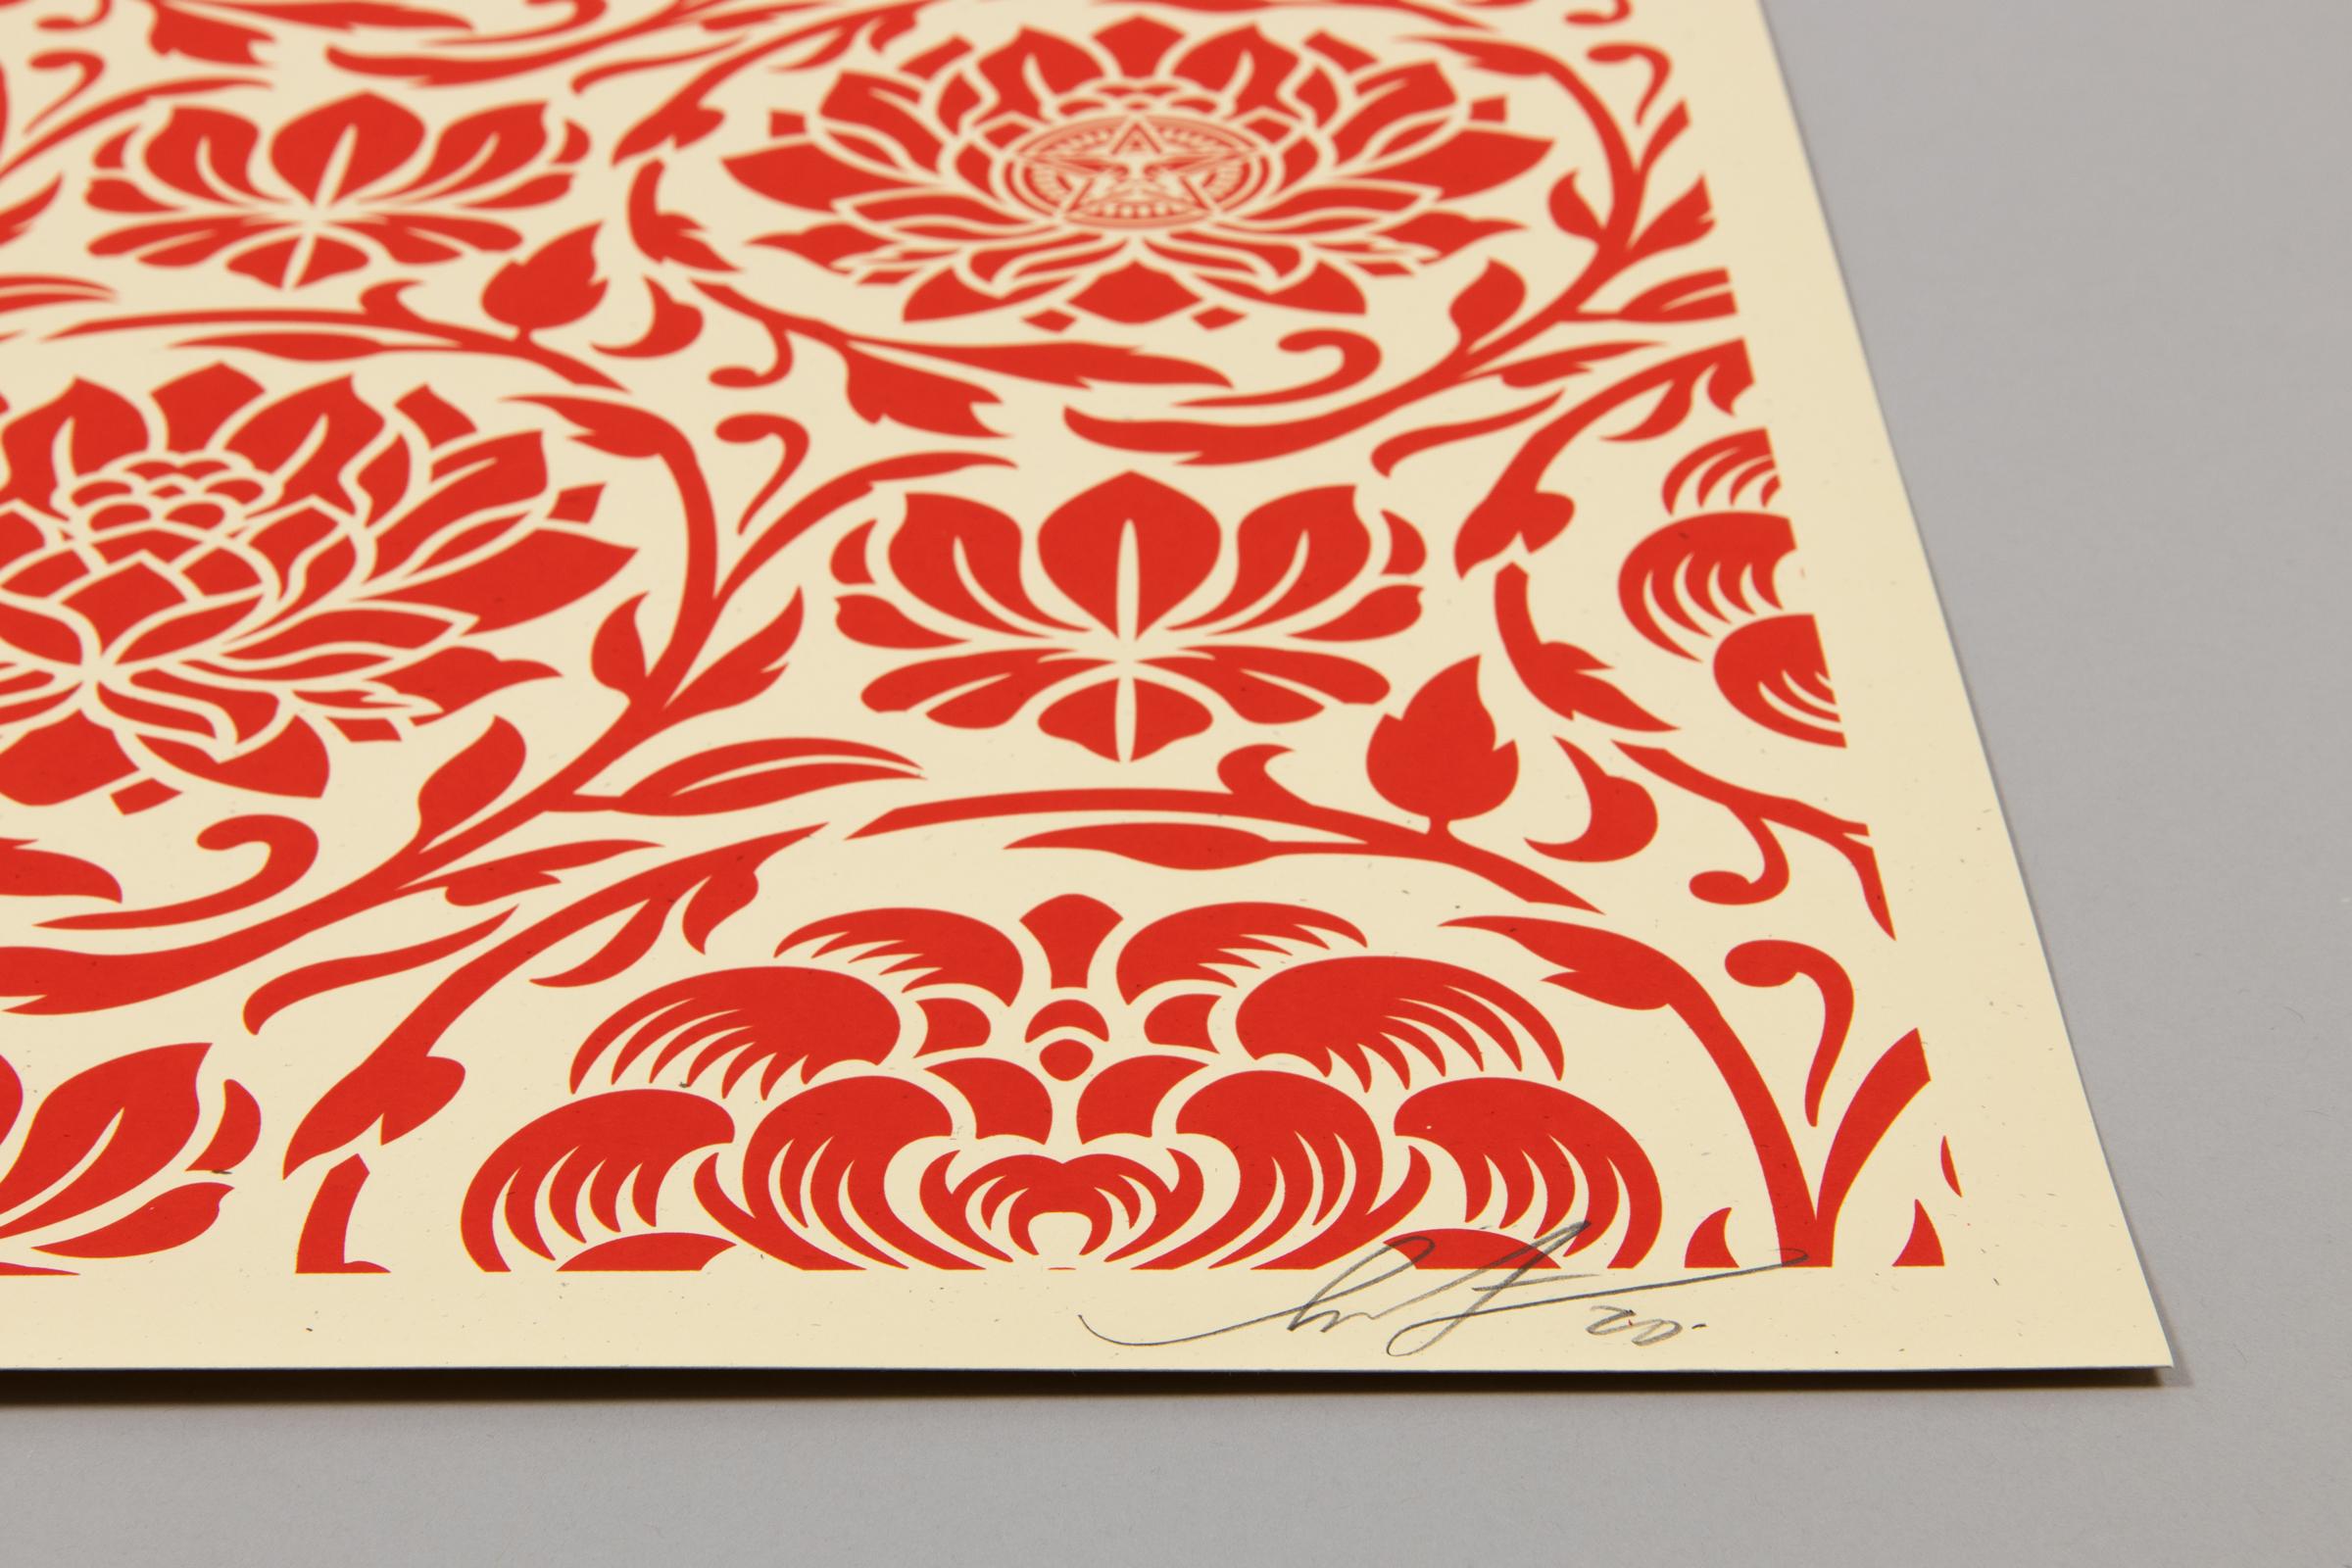 Shepard Fairey, Floral Harmony (Red Yin/Yang) - 2 Signed Prints, Street Art  For Sale 4